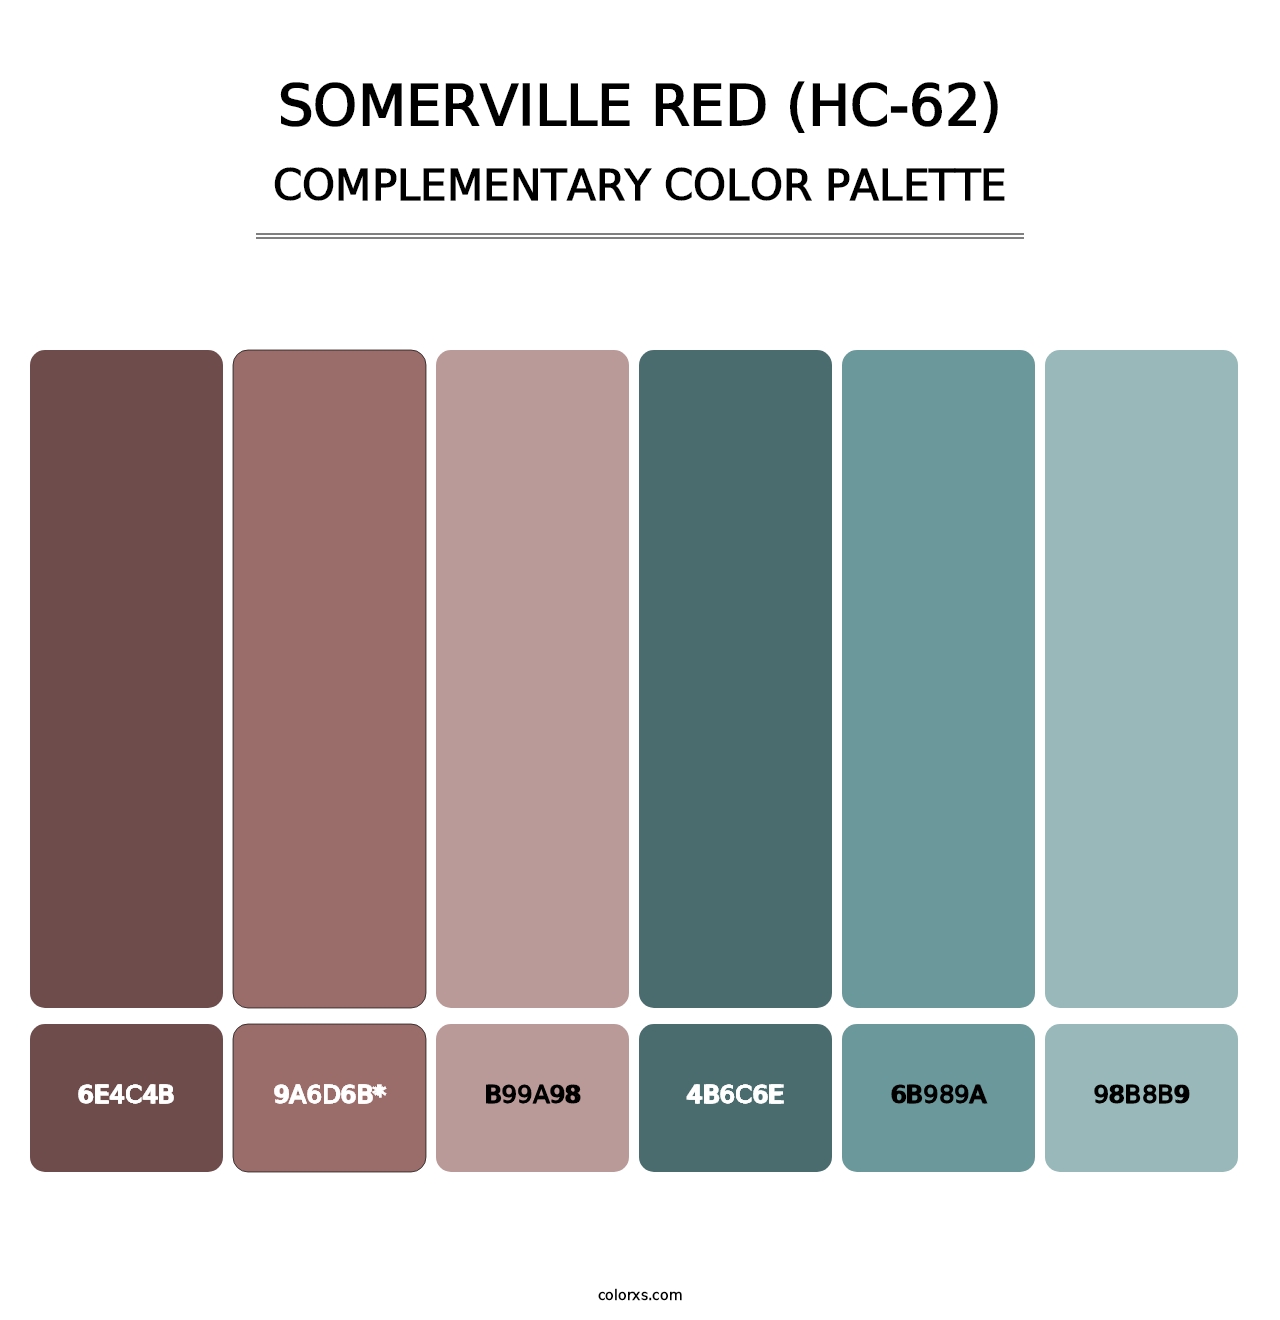 Somerville Red (HC-62) - Complementary Color Palette